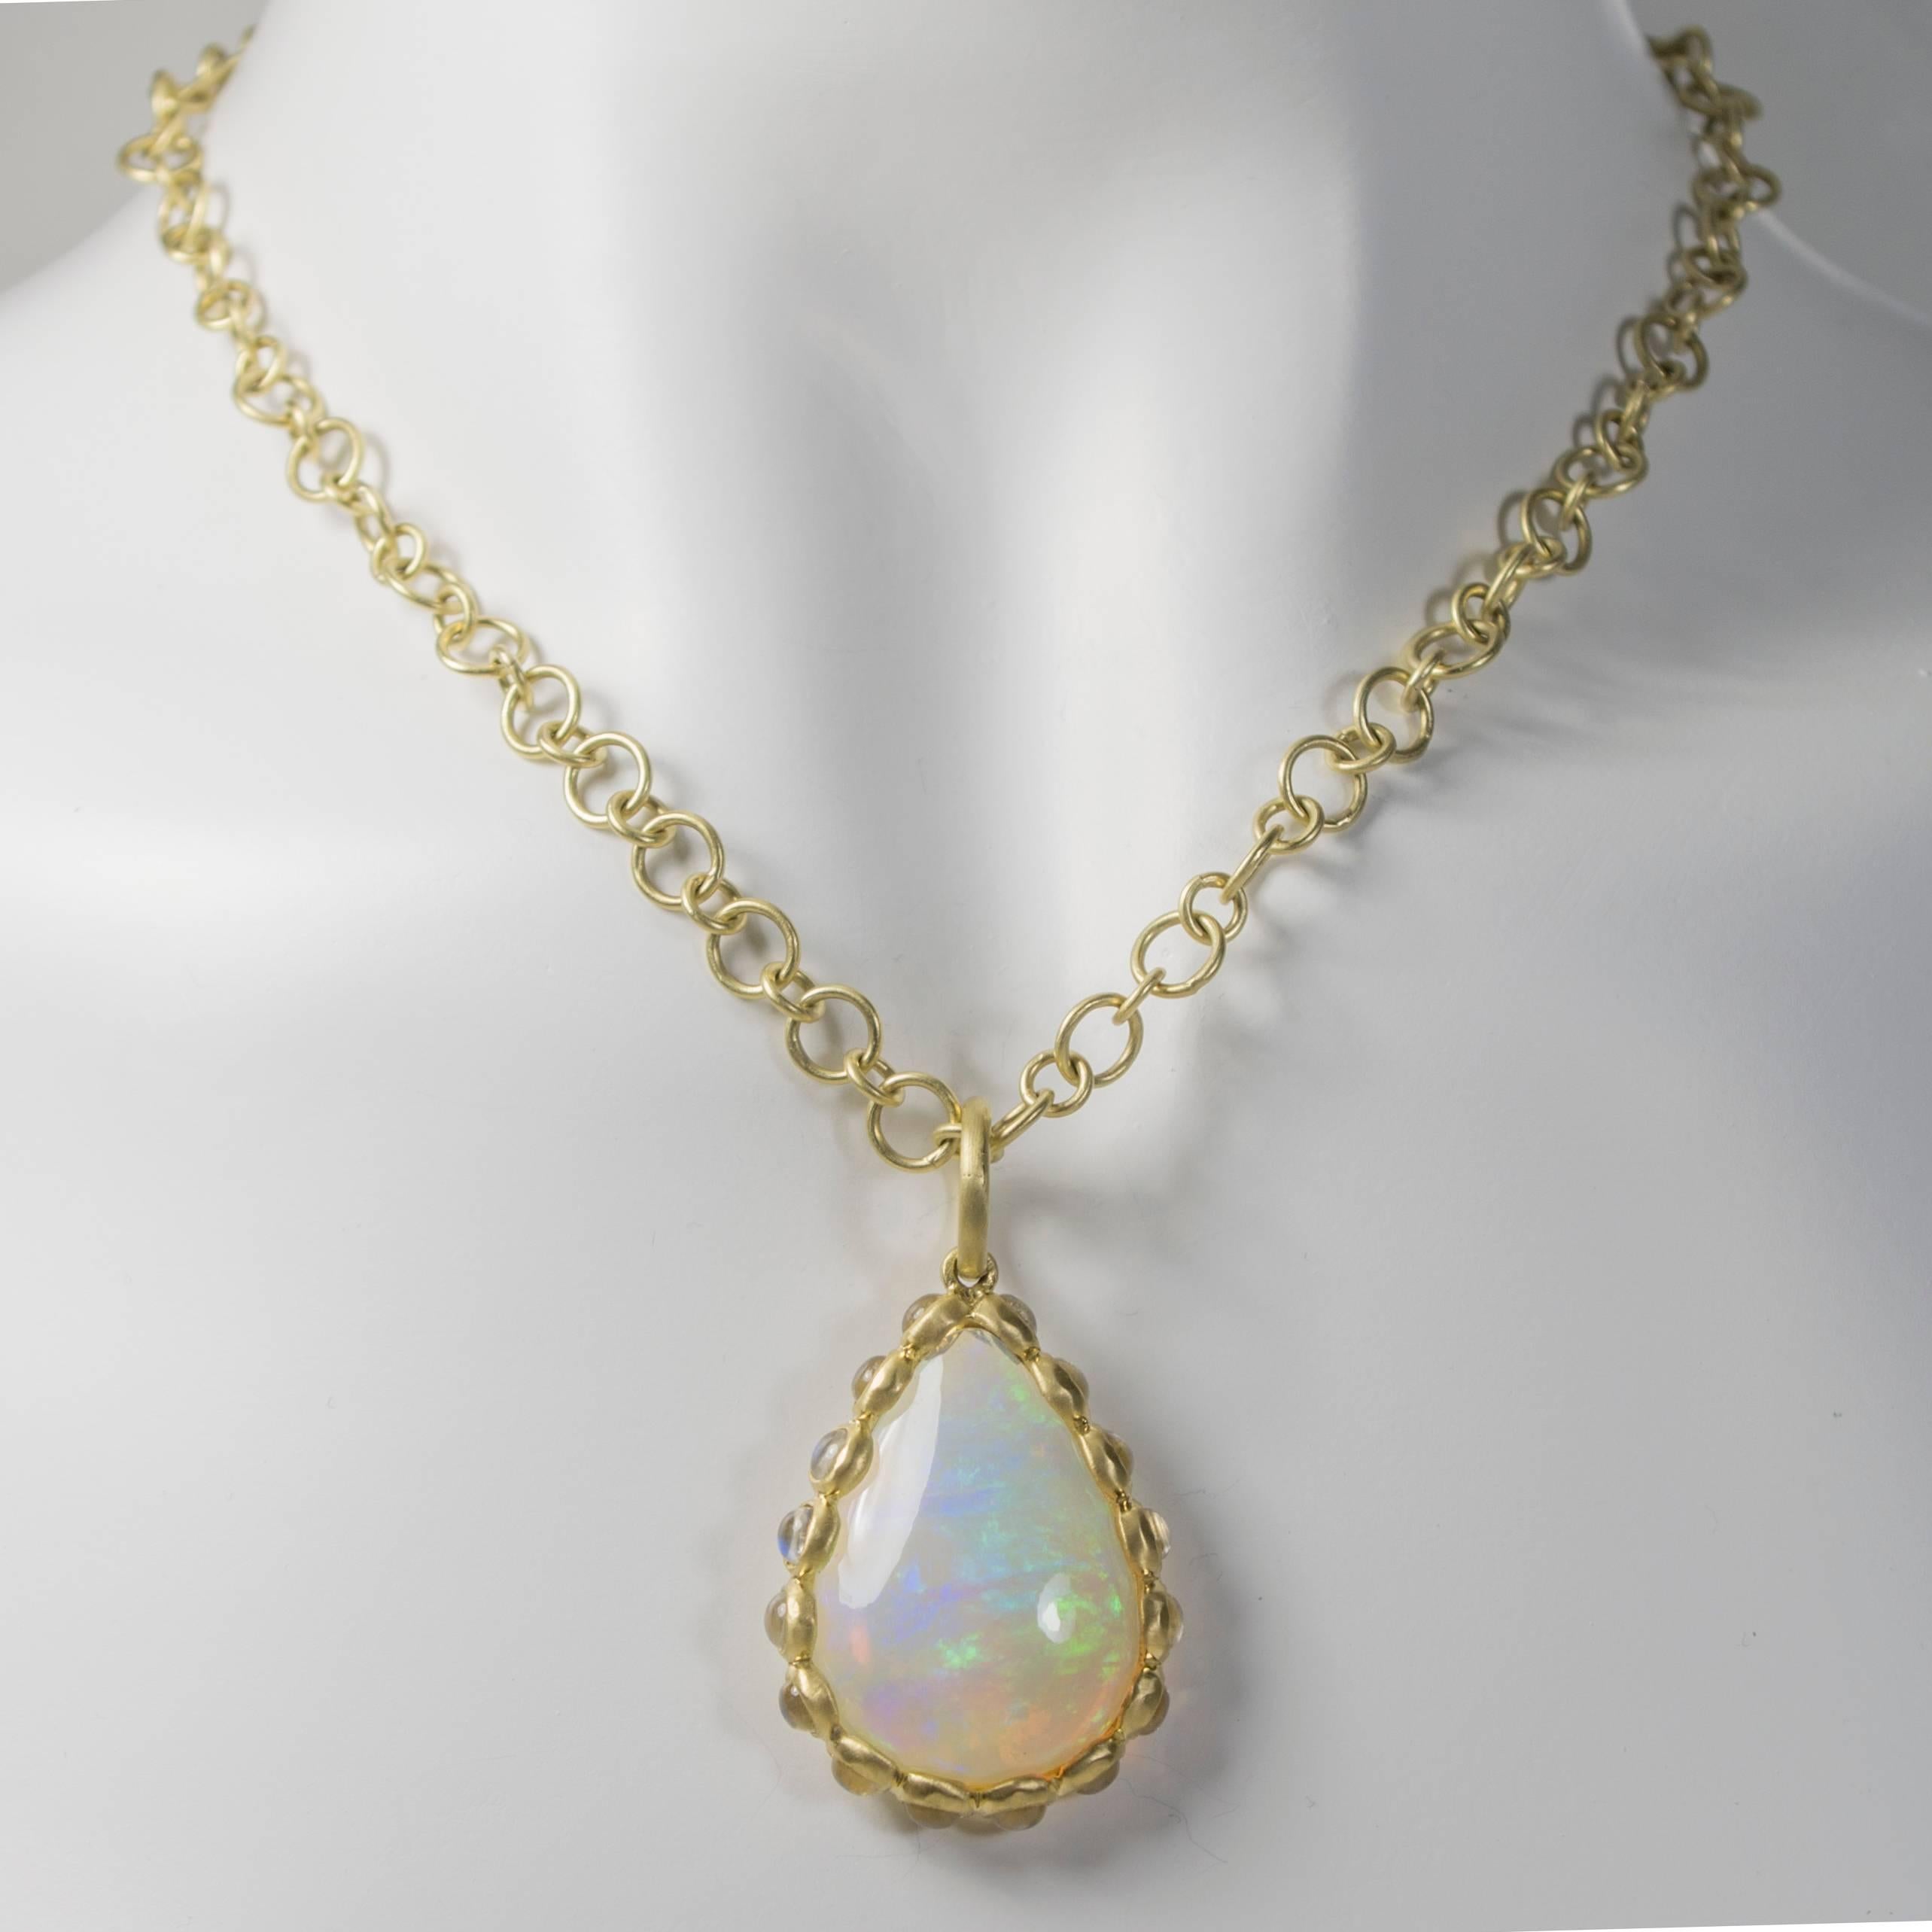 Be prepared for swooning glances with this incredible, one-of-a-kind Ethiopian opal and moonstone pendant.  The handmade setting is 18k green* gold featuring a 9.13 cts. pear-shaped opal surrounded by 16 bezel set moonstones.  Incredible color in a